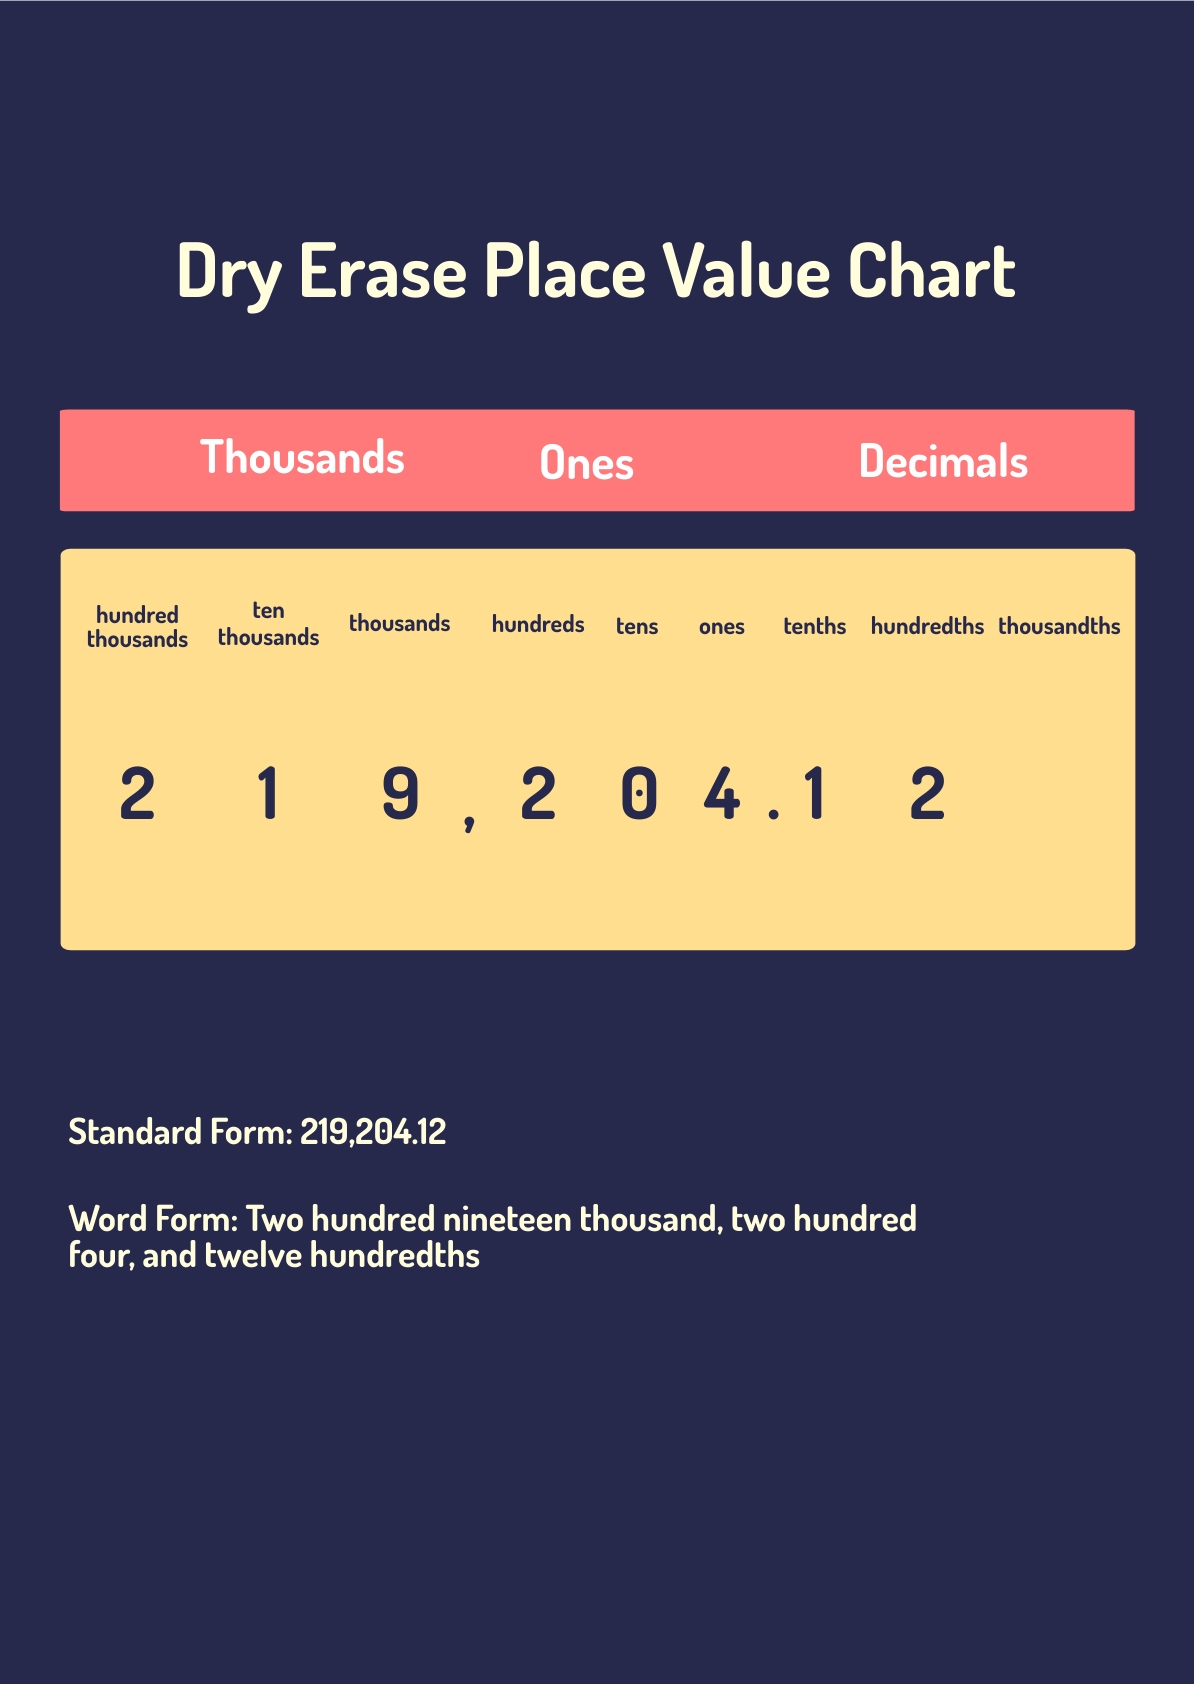 Free Dry Erase Place Value Chart in PDF, Illustrator